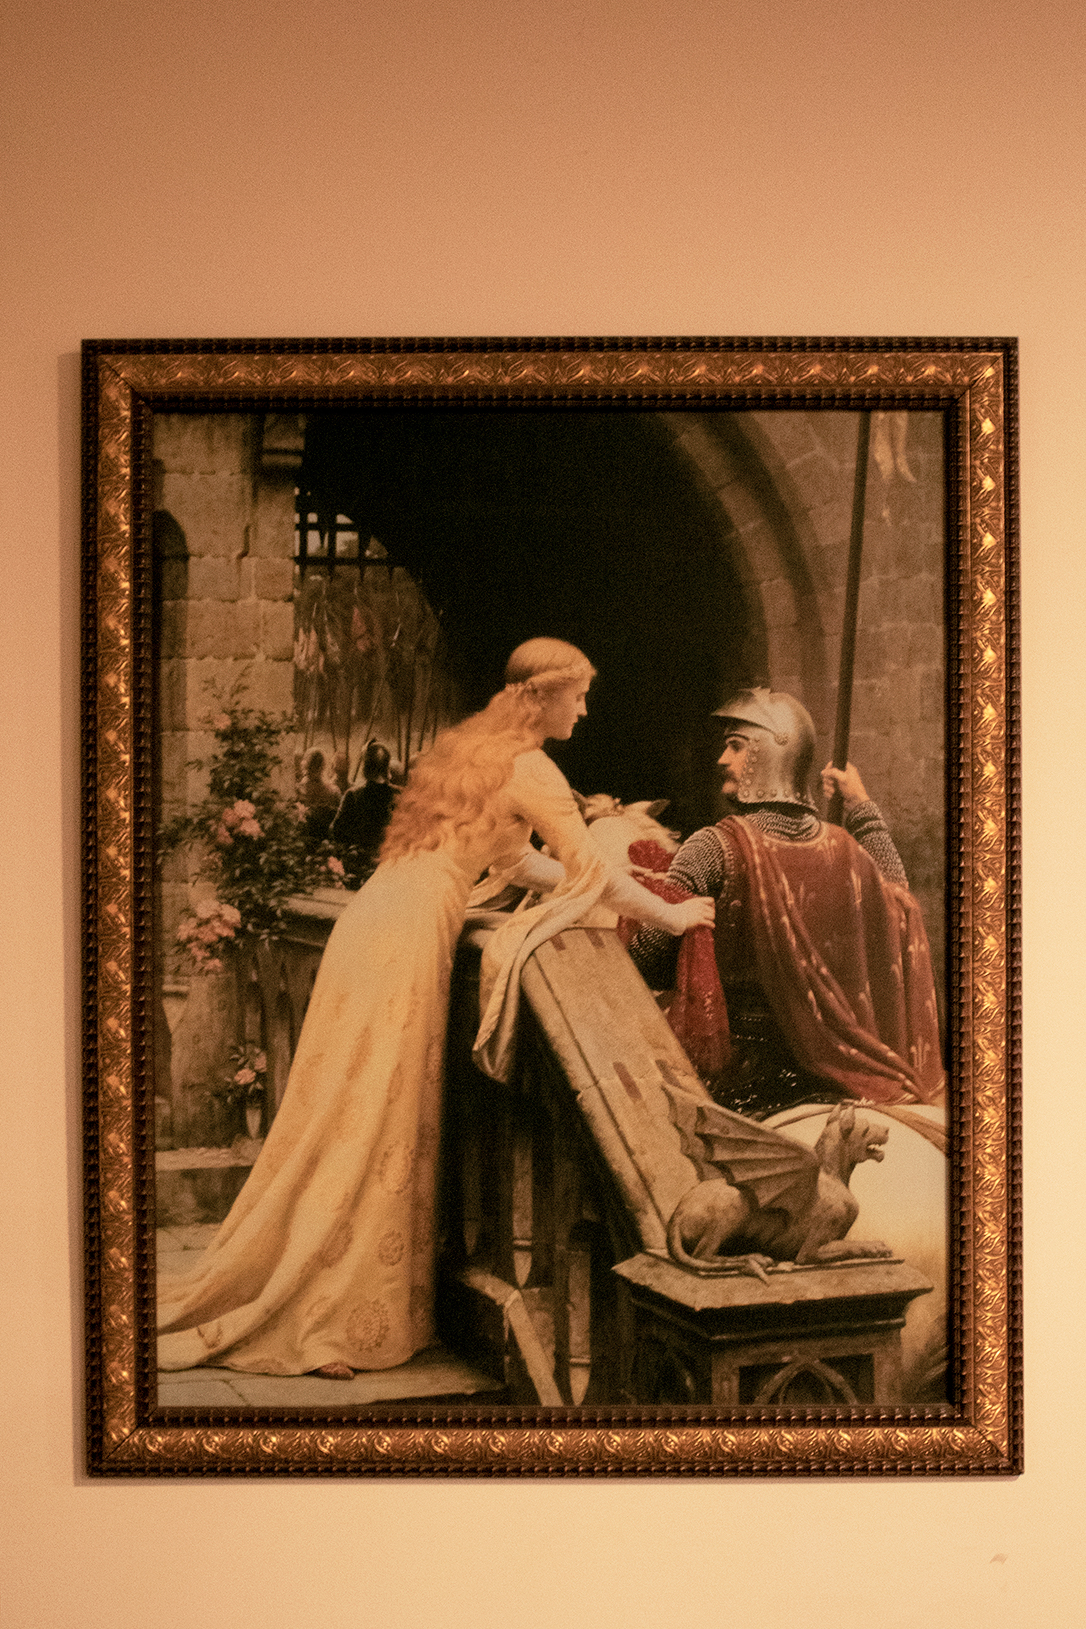 A replica of "Godspeed," a painting by Edmund Leighton, about a knight who goes to war and has to leave behind his beloved. 